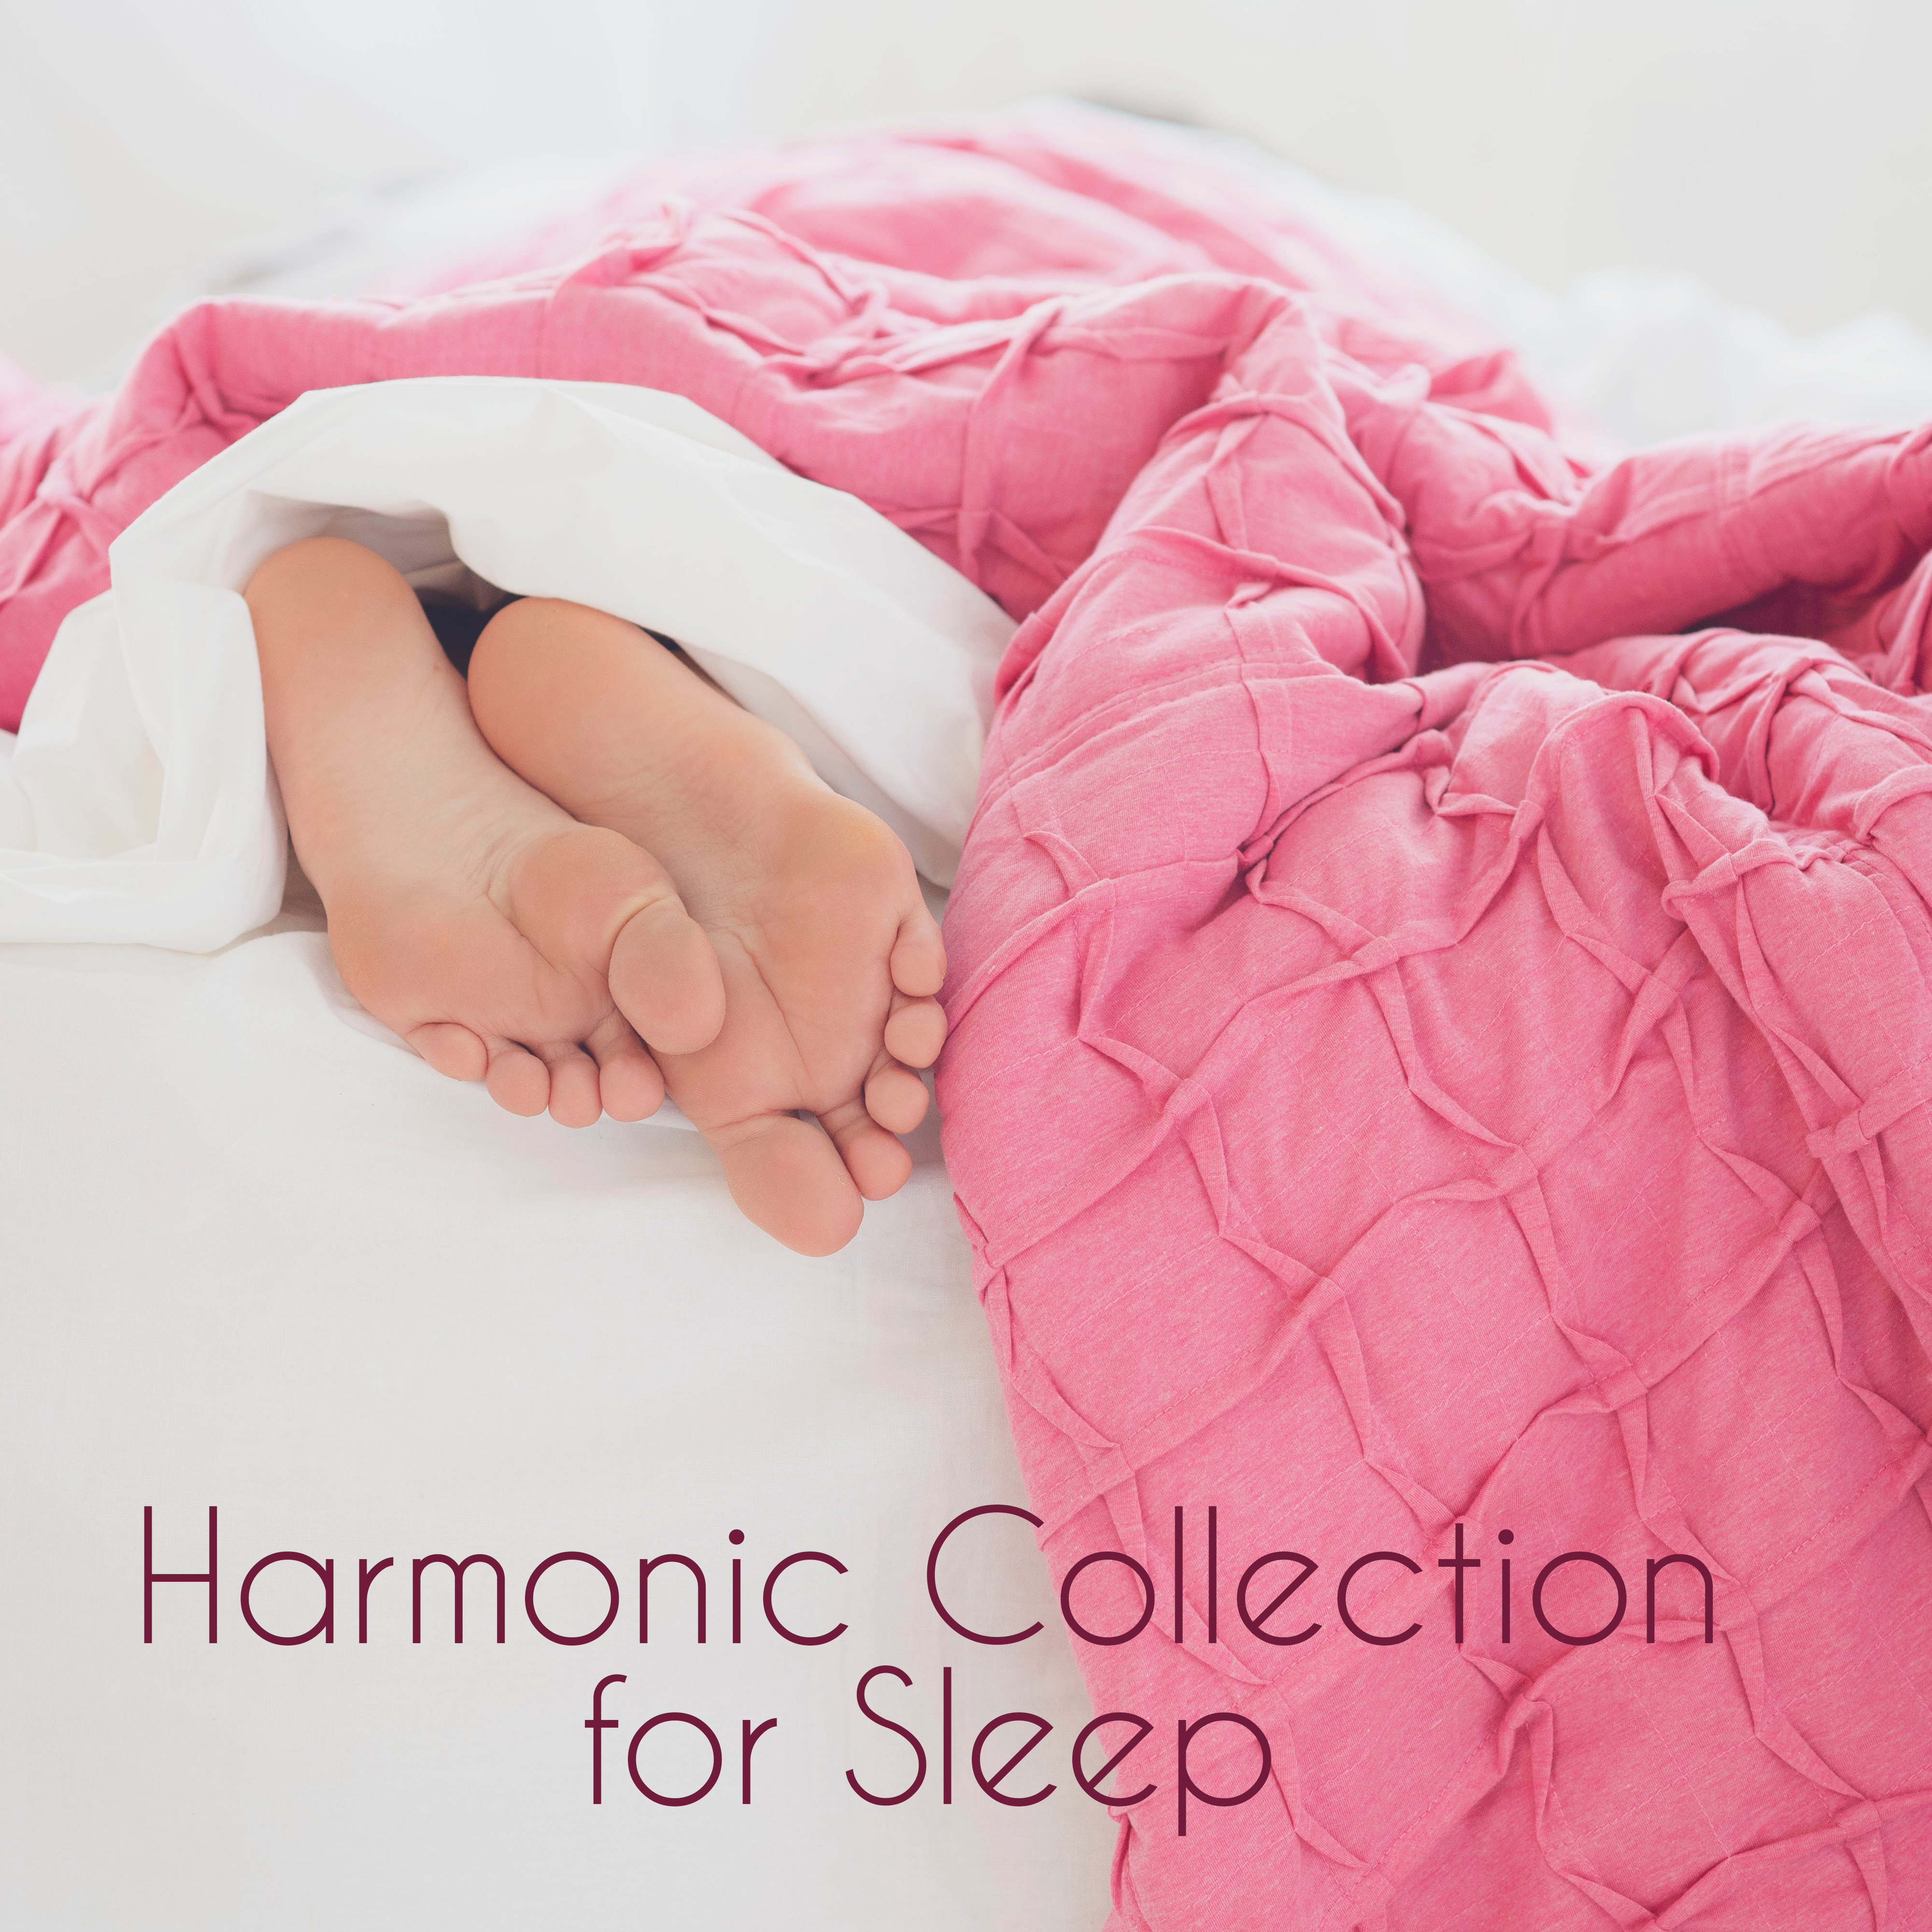 Harmonic Collection for Sleep – Sleep Songs, Relaxing Therapy, Deep Harmony, Sleep Melodies, Pure Mind, Perfect Relax Zone